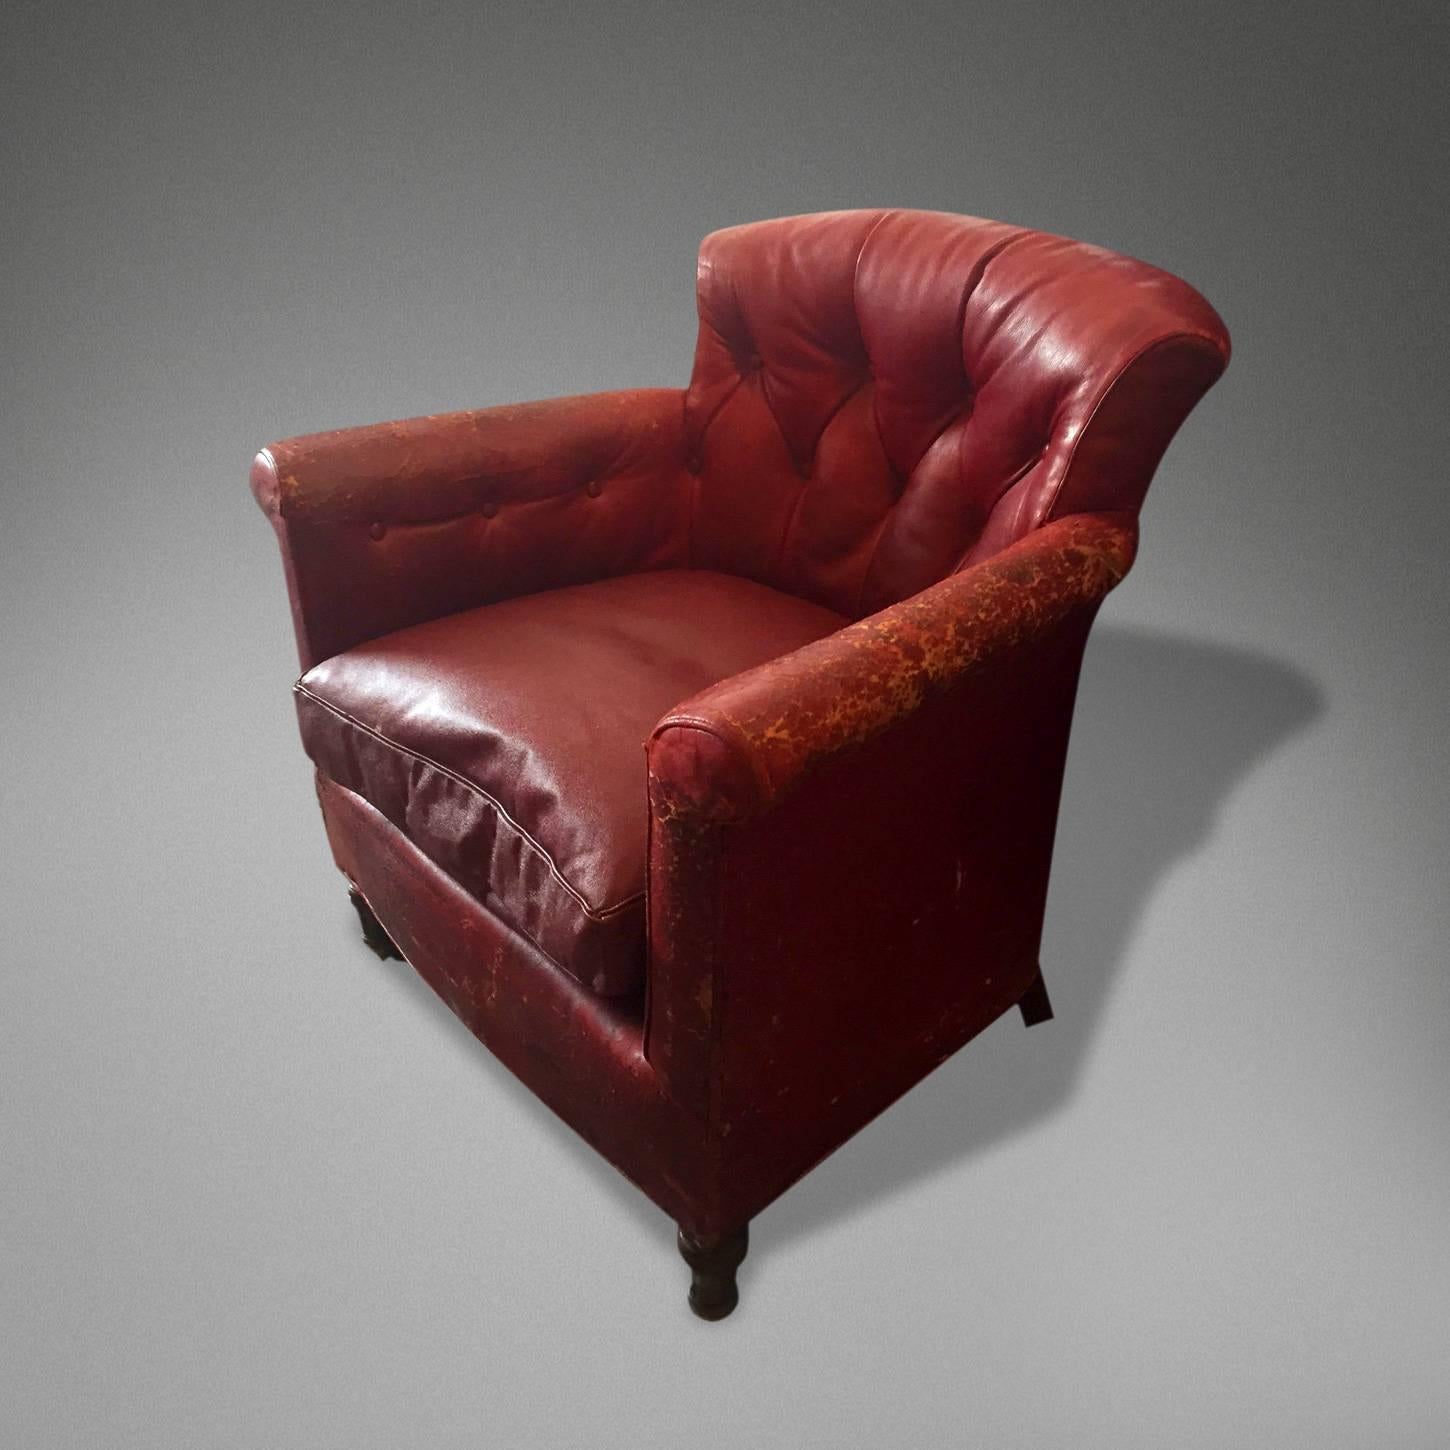 English 19th Century Howard & Sons Red Leather Armchair For Sale